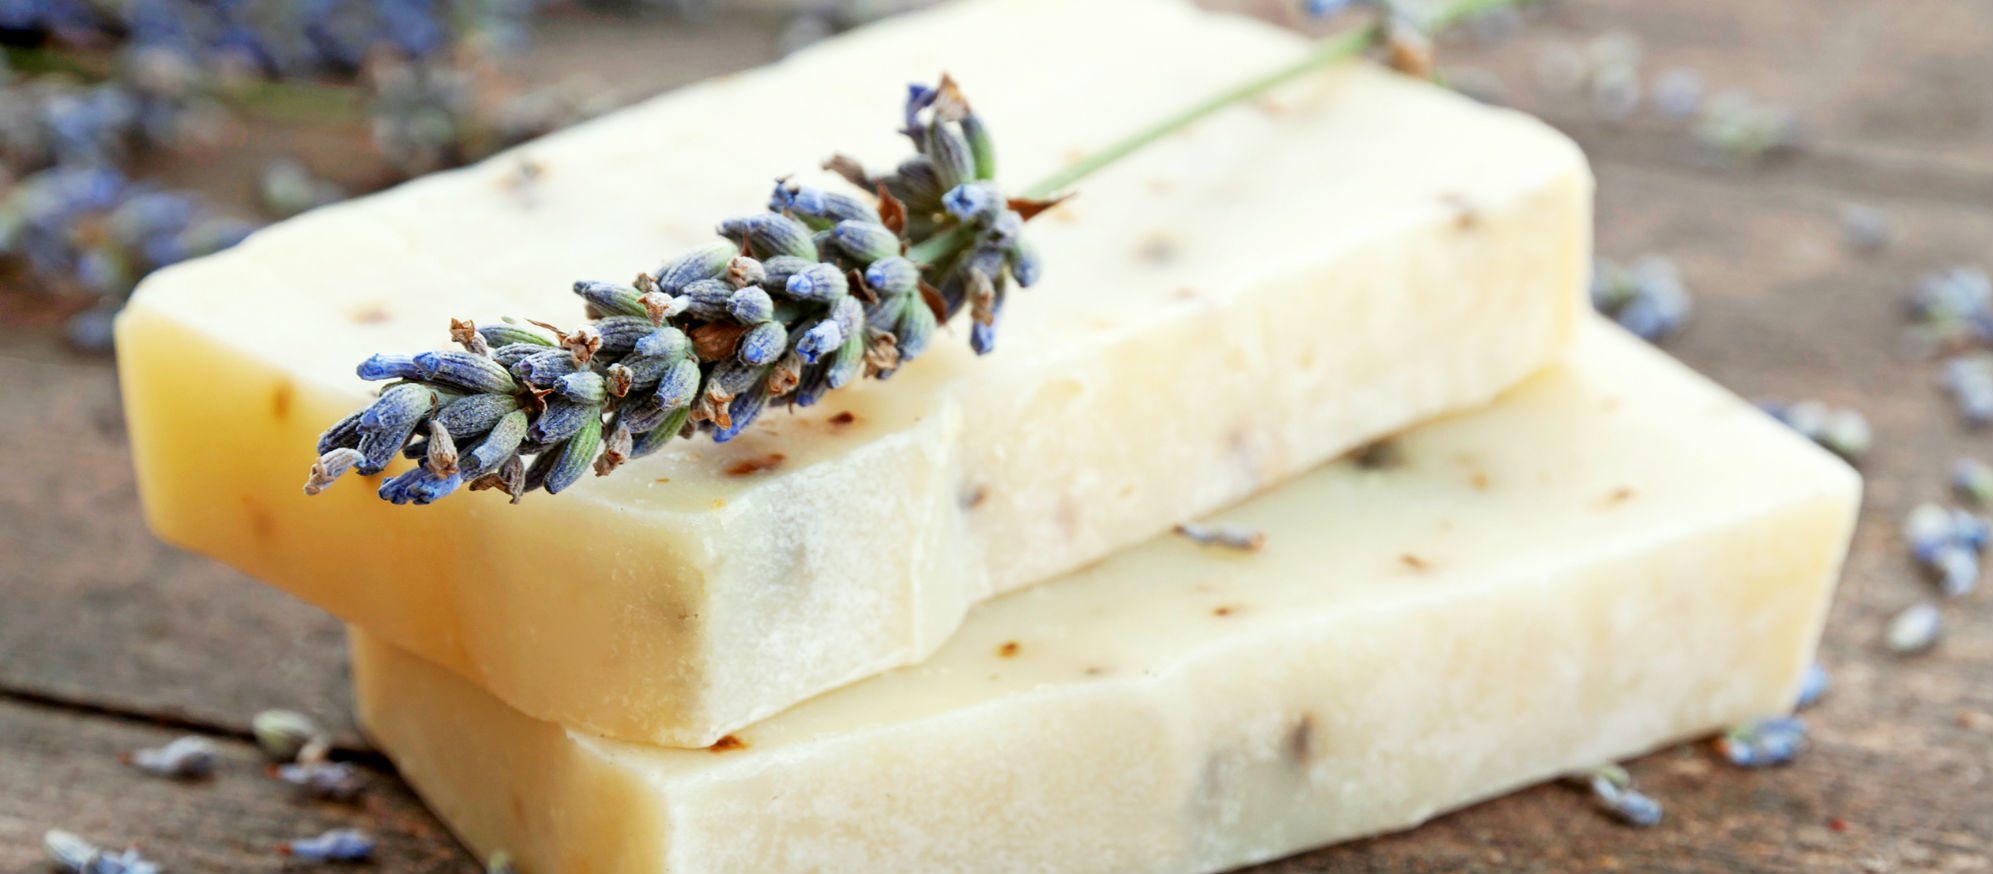 Cleaning Soap: A Natural Basic Bar Soap Recipe for DIY Cleaning